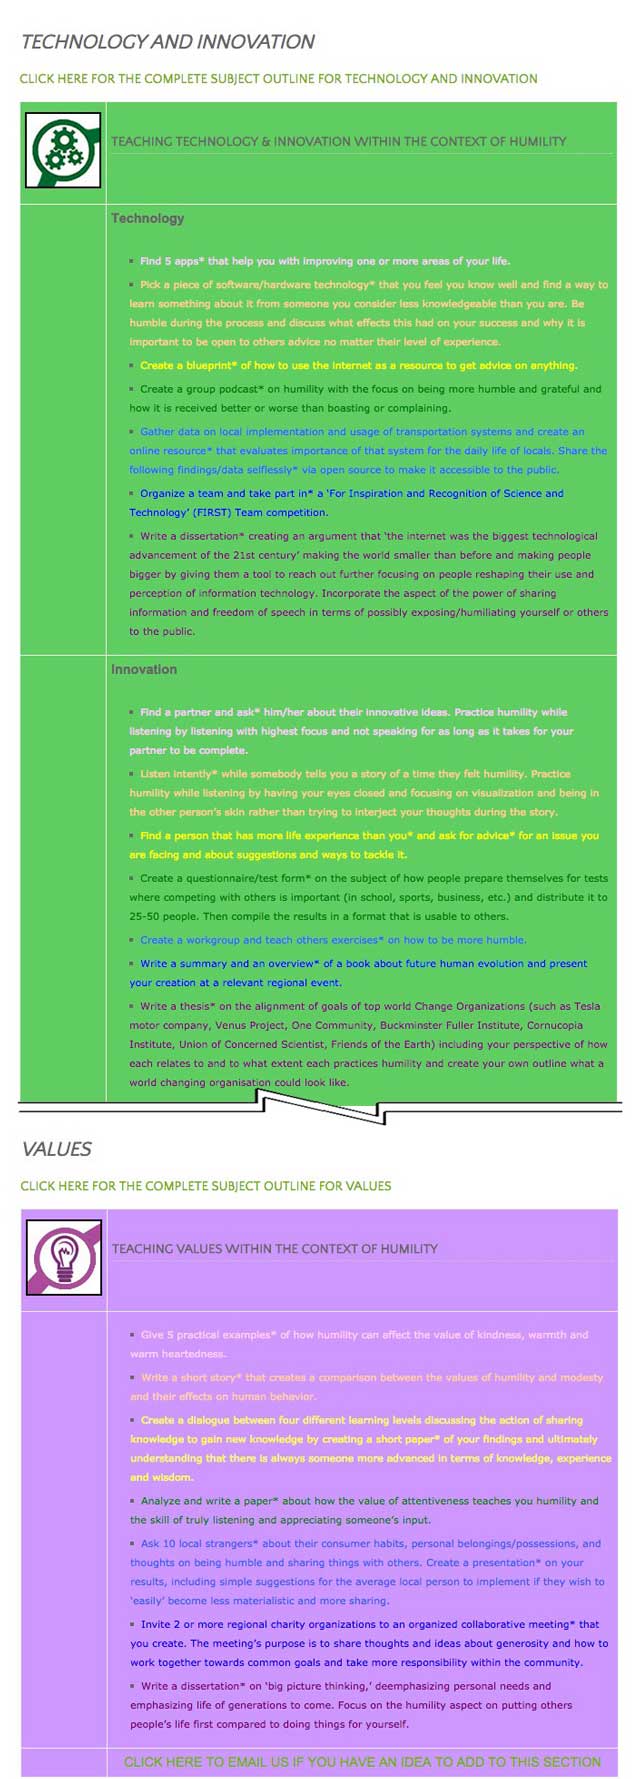 This last week the core team transferred the final 25% of the written content for the Humility Lesson Plan to the website, as you see here. This lesson plan purposed to teach all subjects, to all learning levels, in any learning environment, using the central theme of “Humility” is now 100% completed on our website.